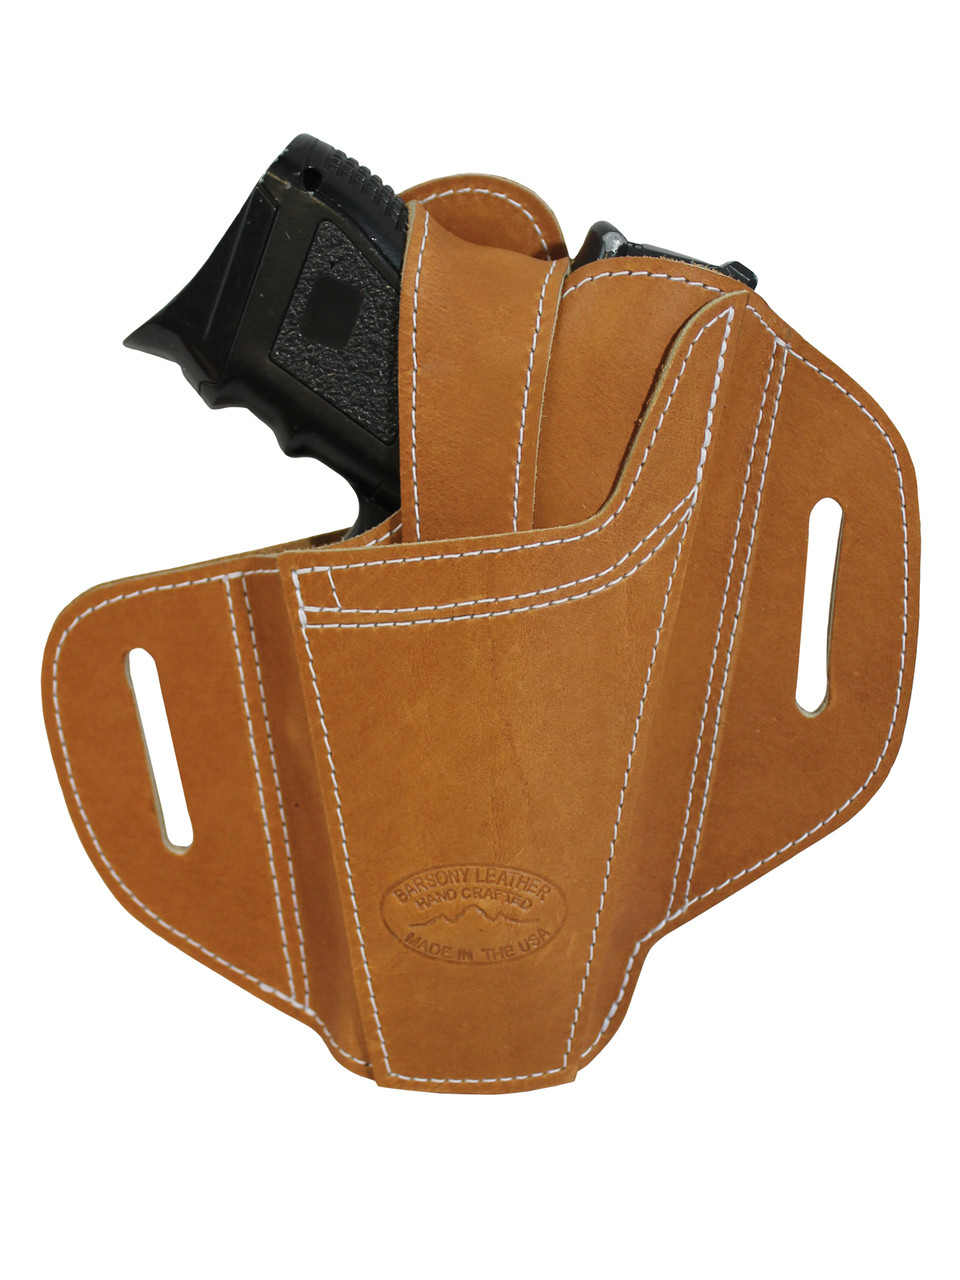 Ambidextrous Tan Leather Pancake Holster for Compact Sub-Compact 9mm 40 45 Pistols